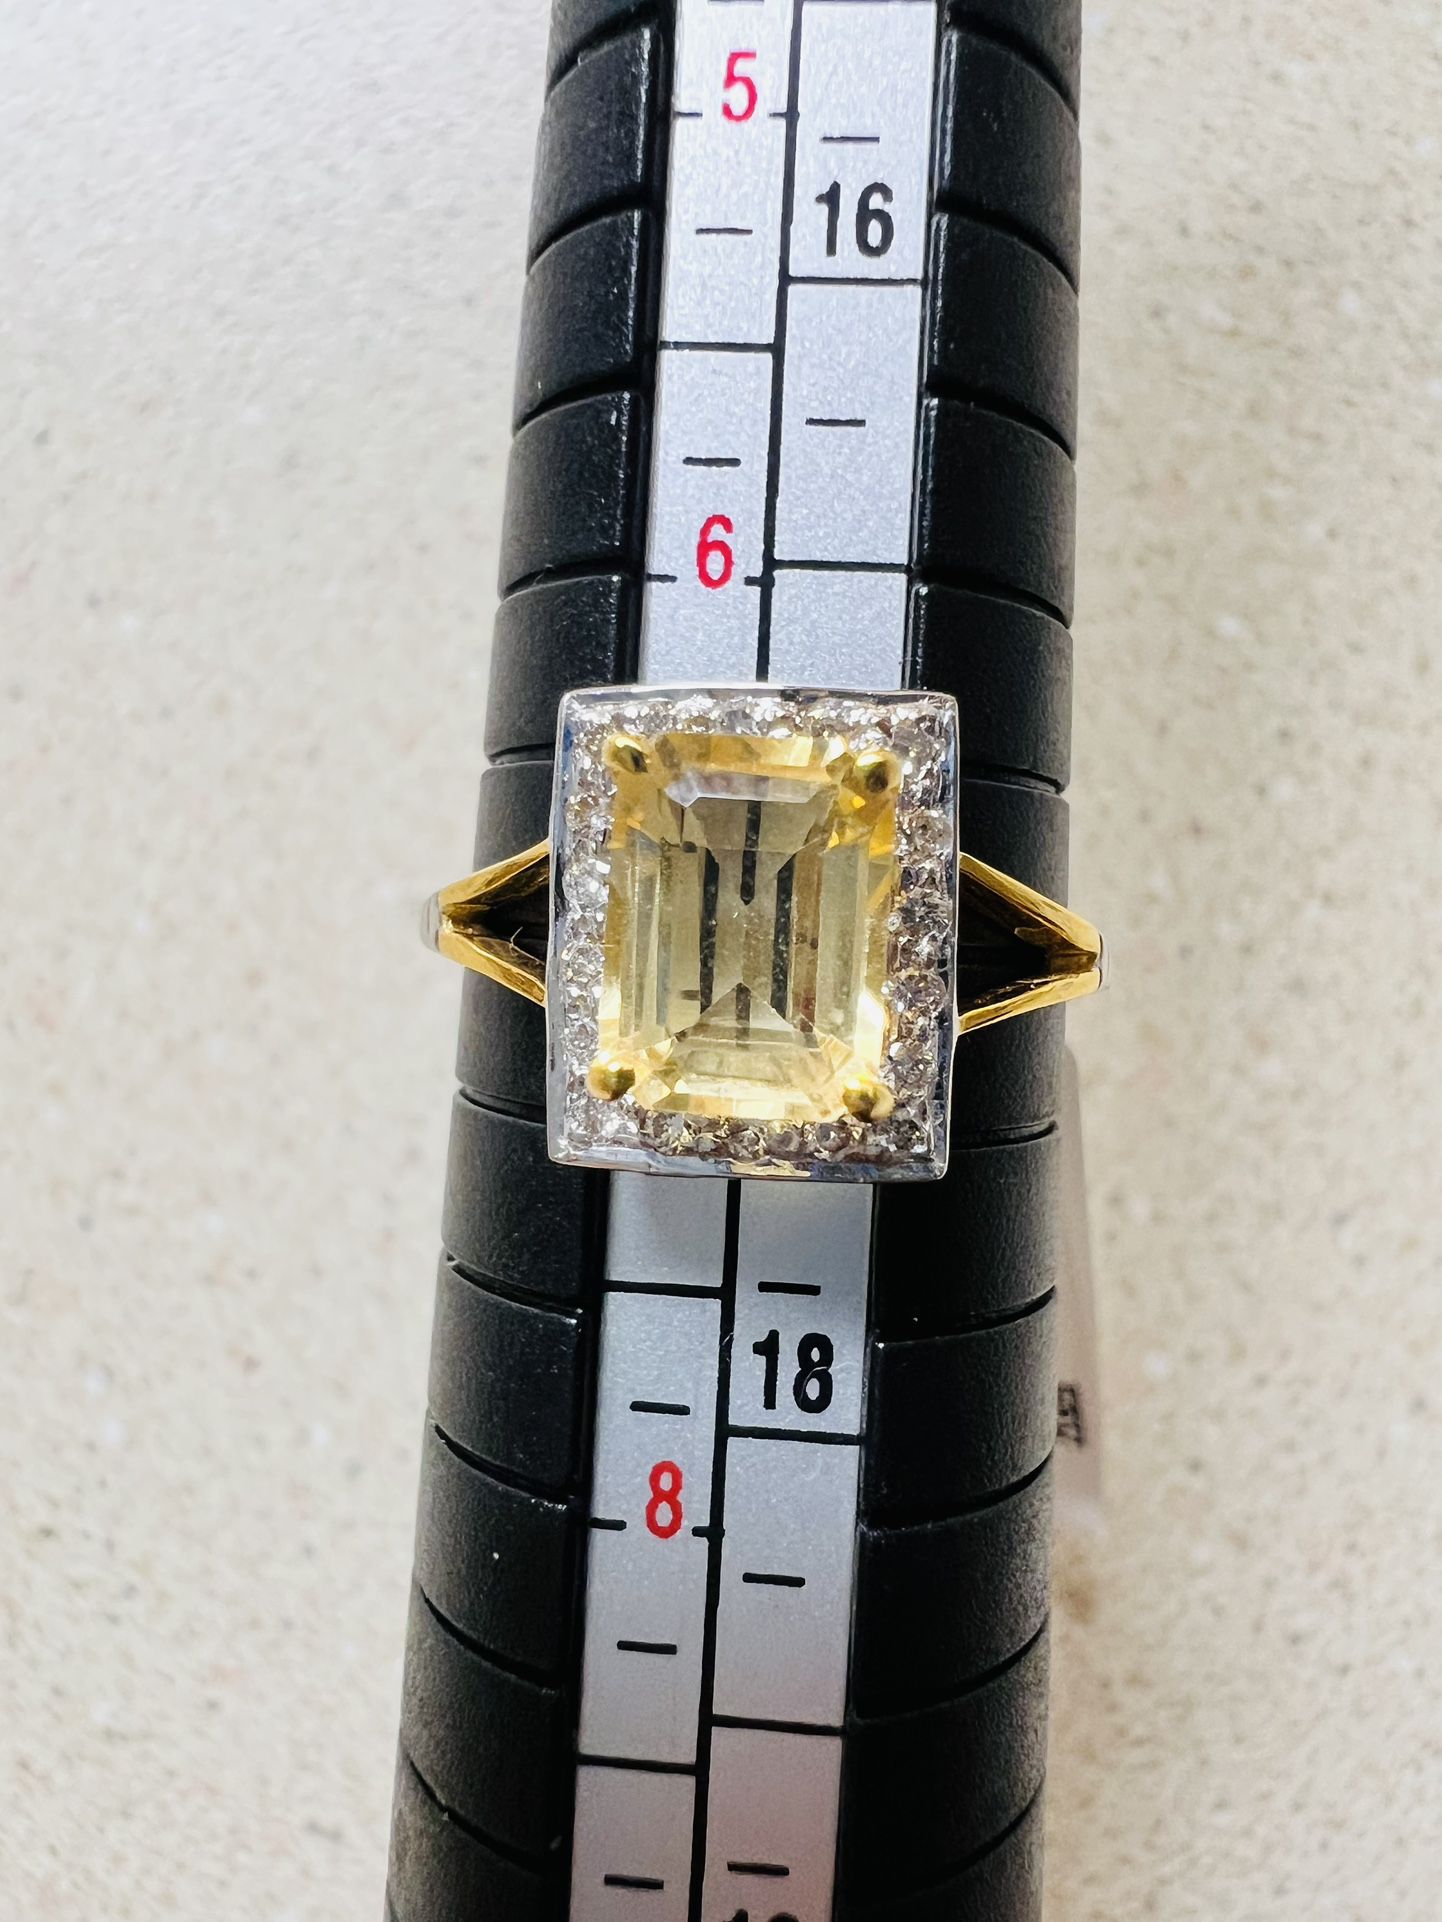 Natural DIAMONDS+CITRINE 0.25ct 14kt Solid Yellow Gold Ring Size 7# wedding